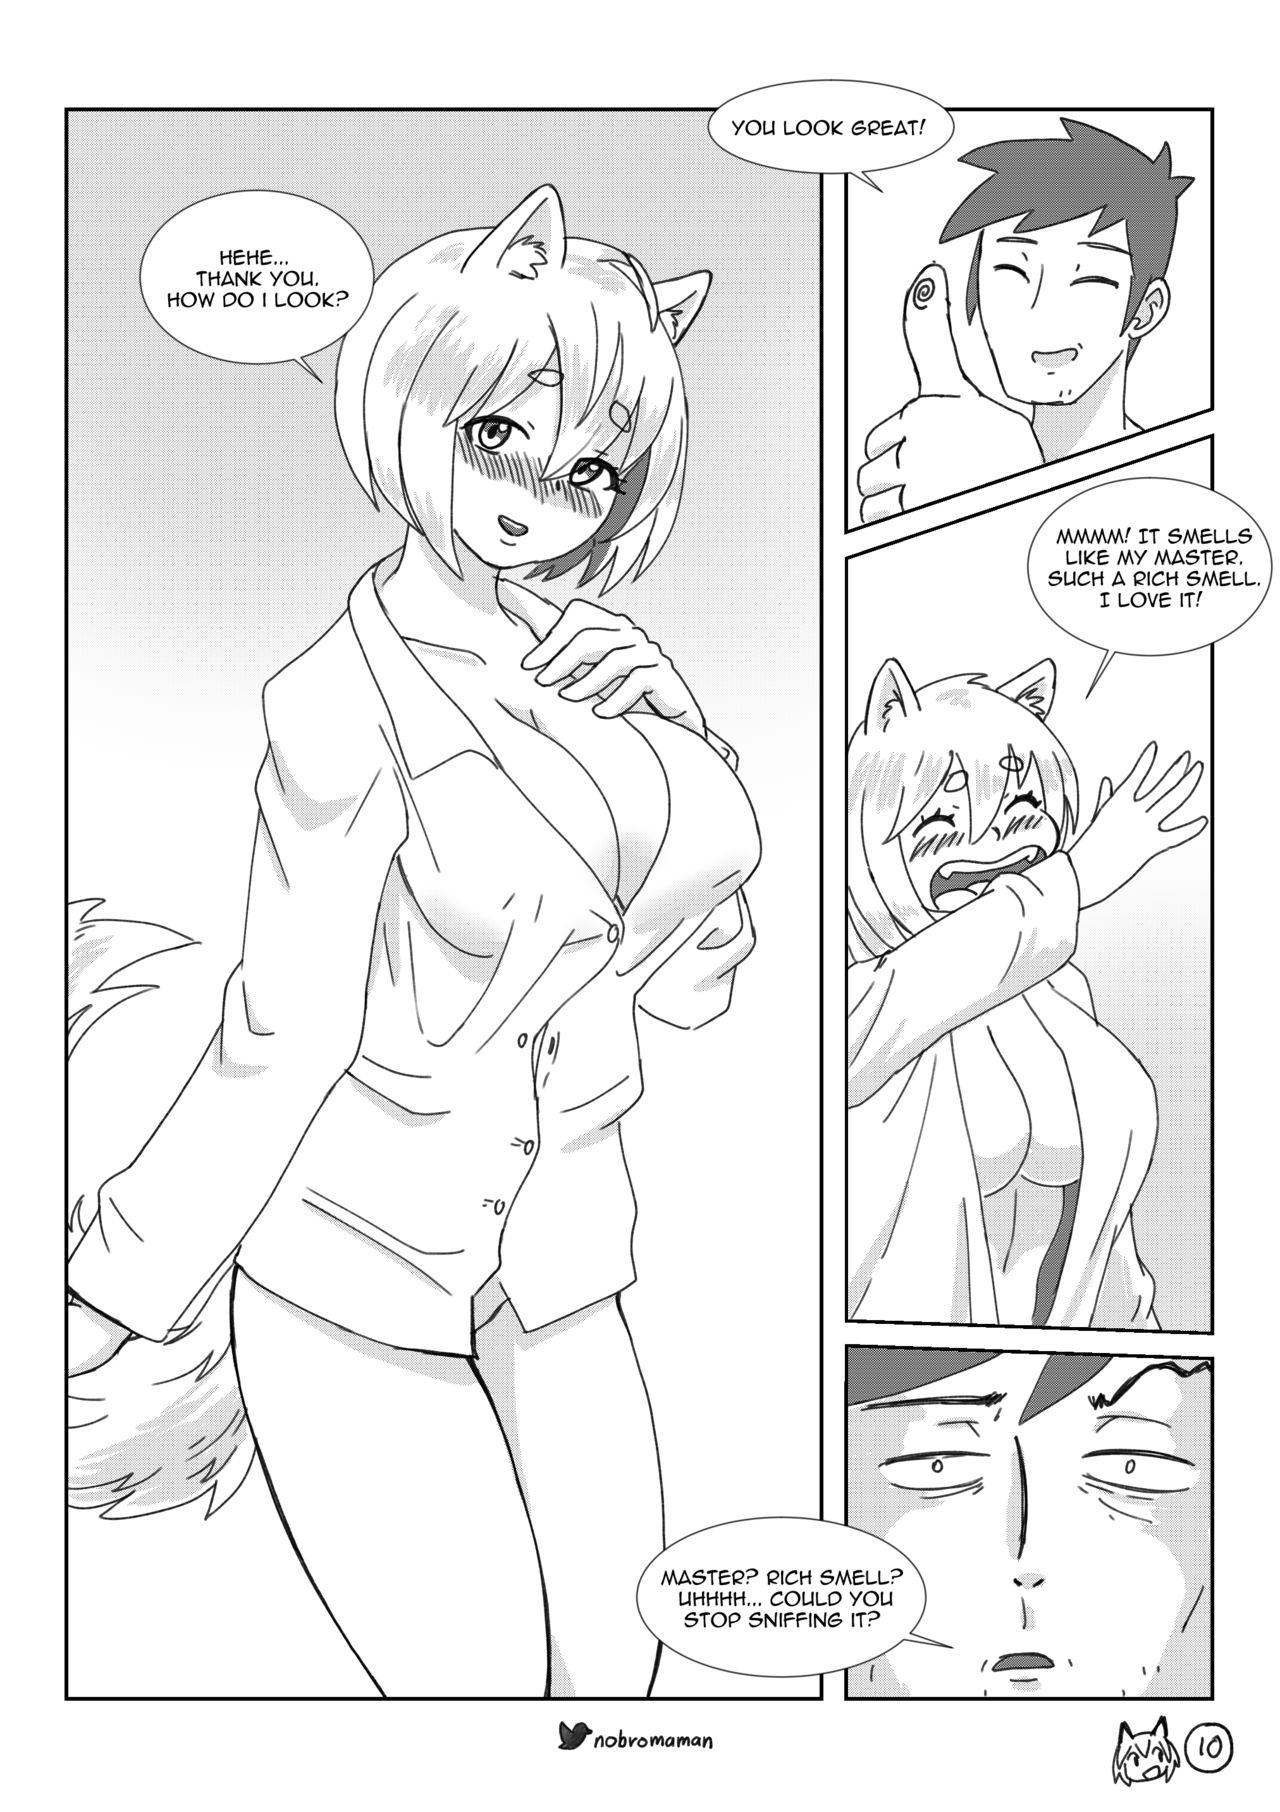 Life with a dog girl - Chapter1 10